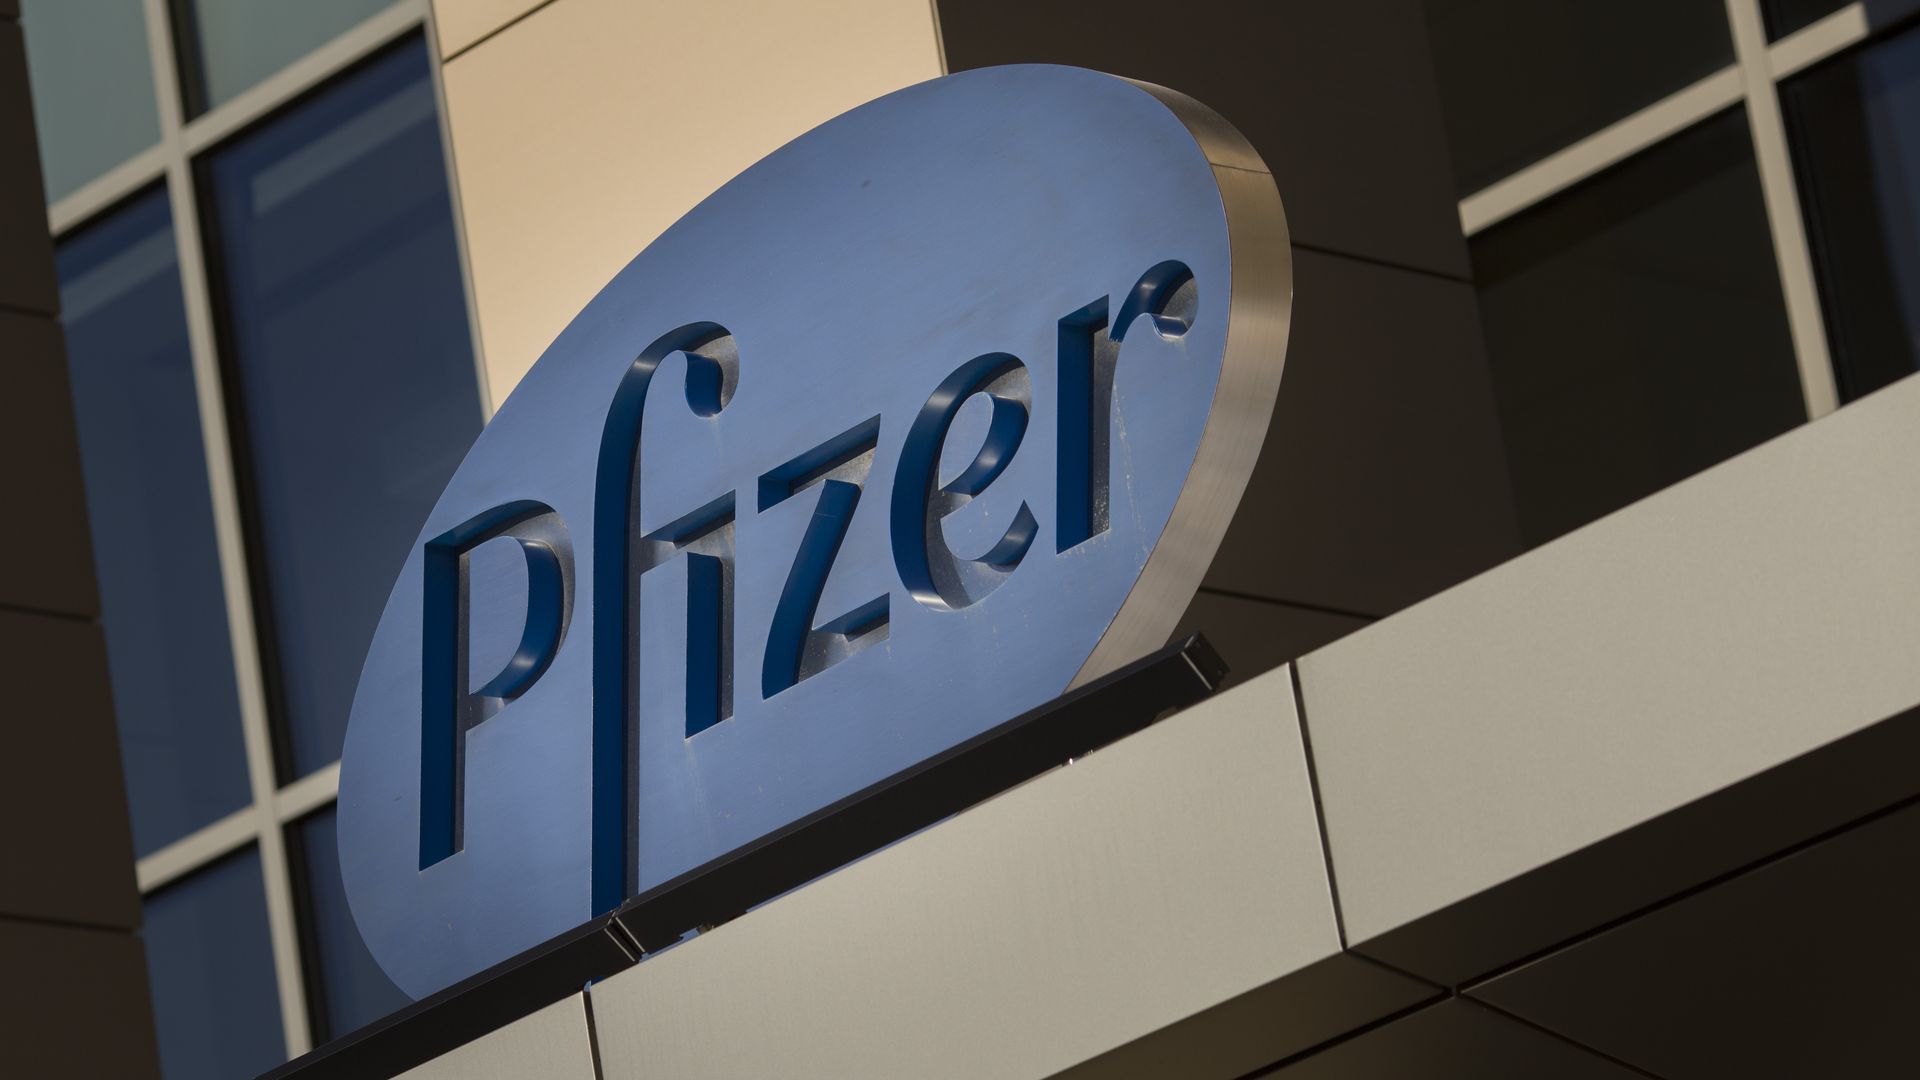 A sign for Pfizer on a building in Massachusetts.